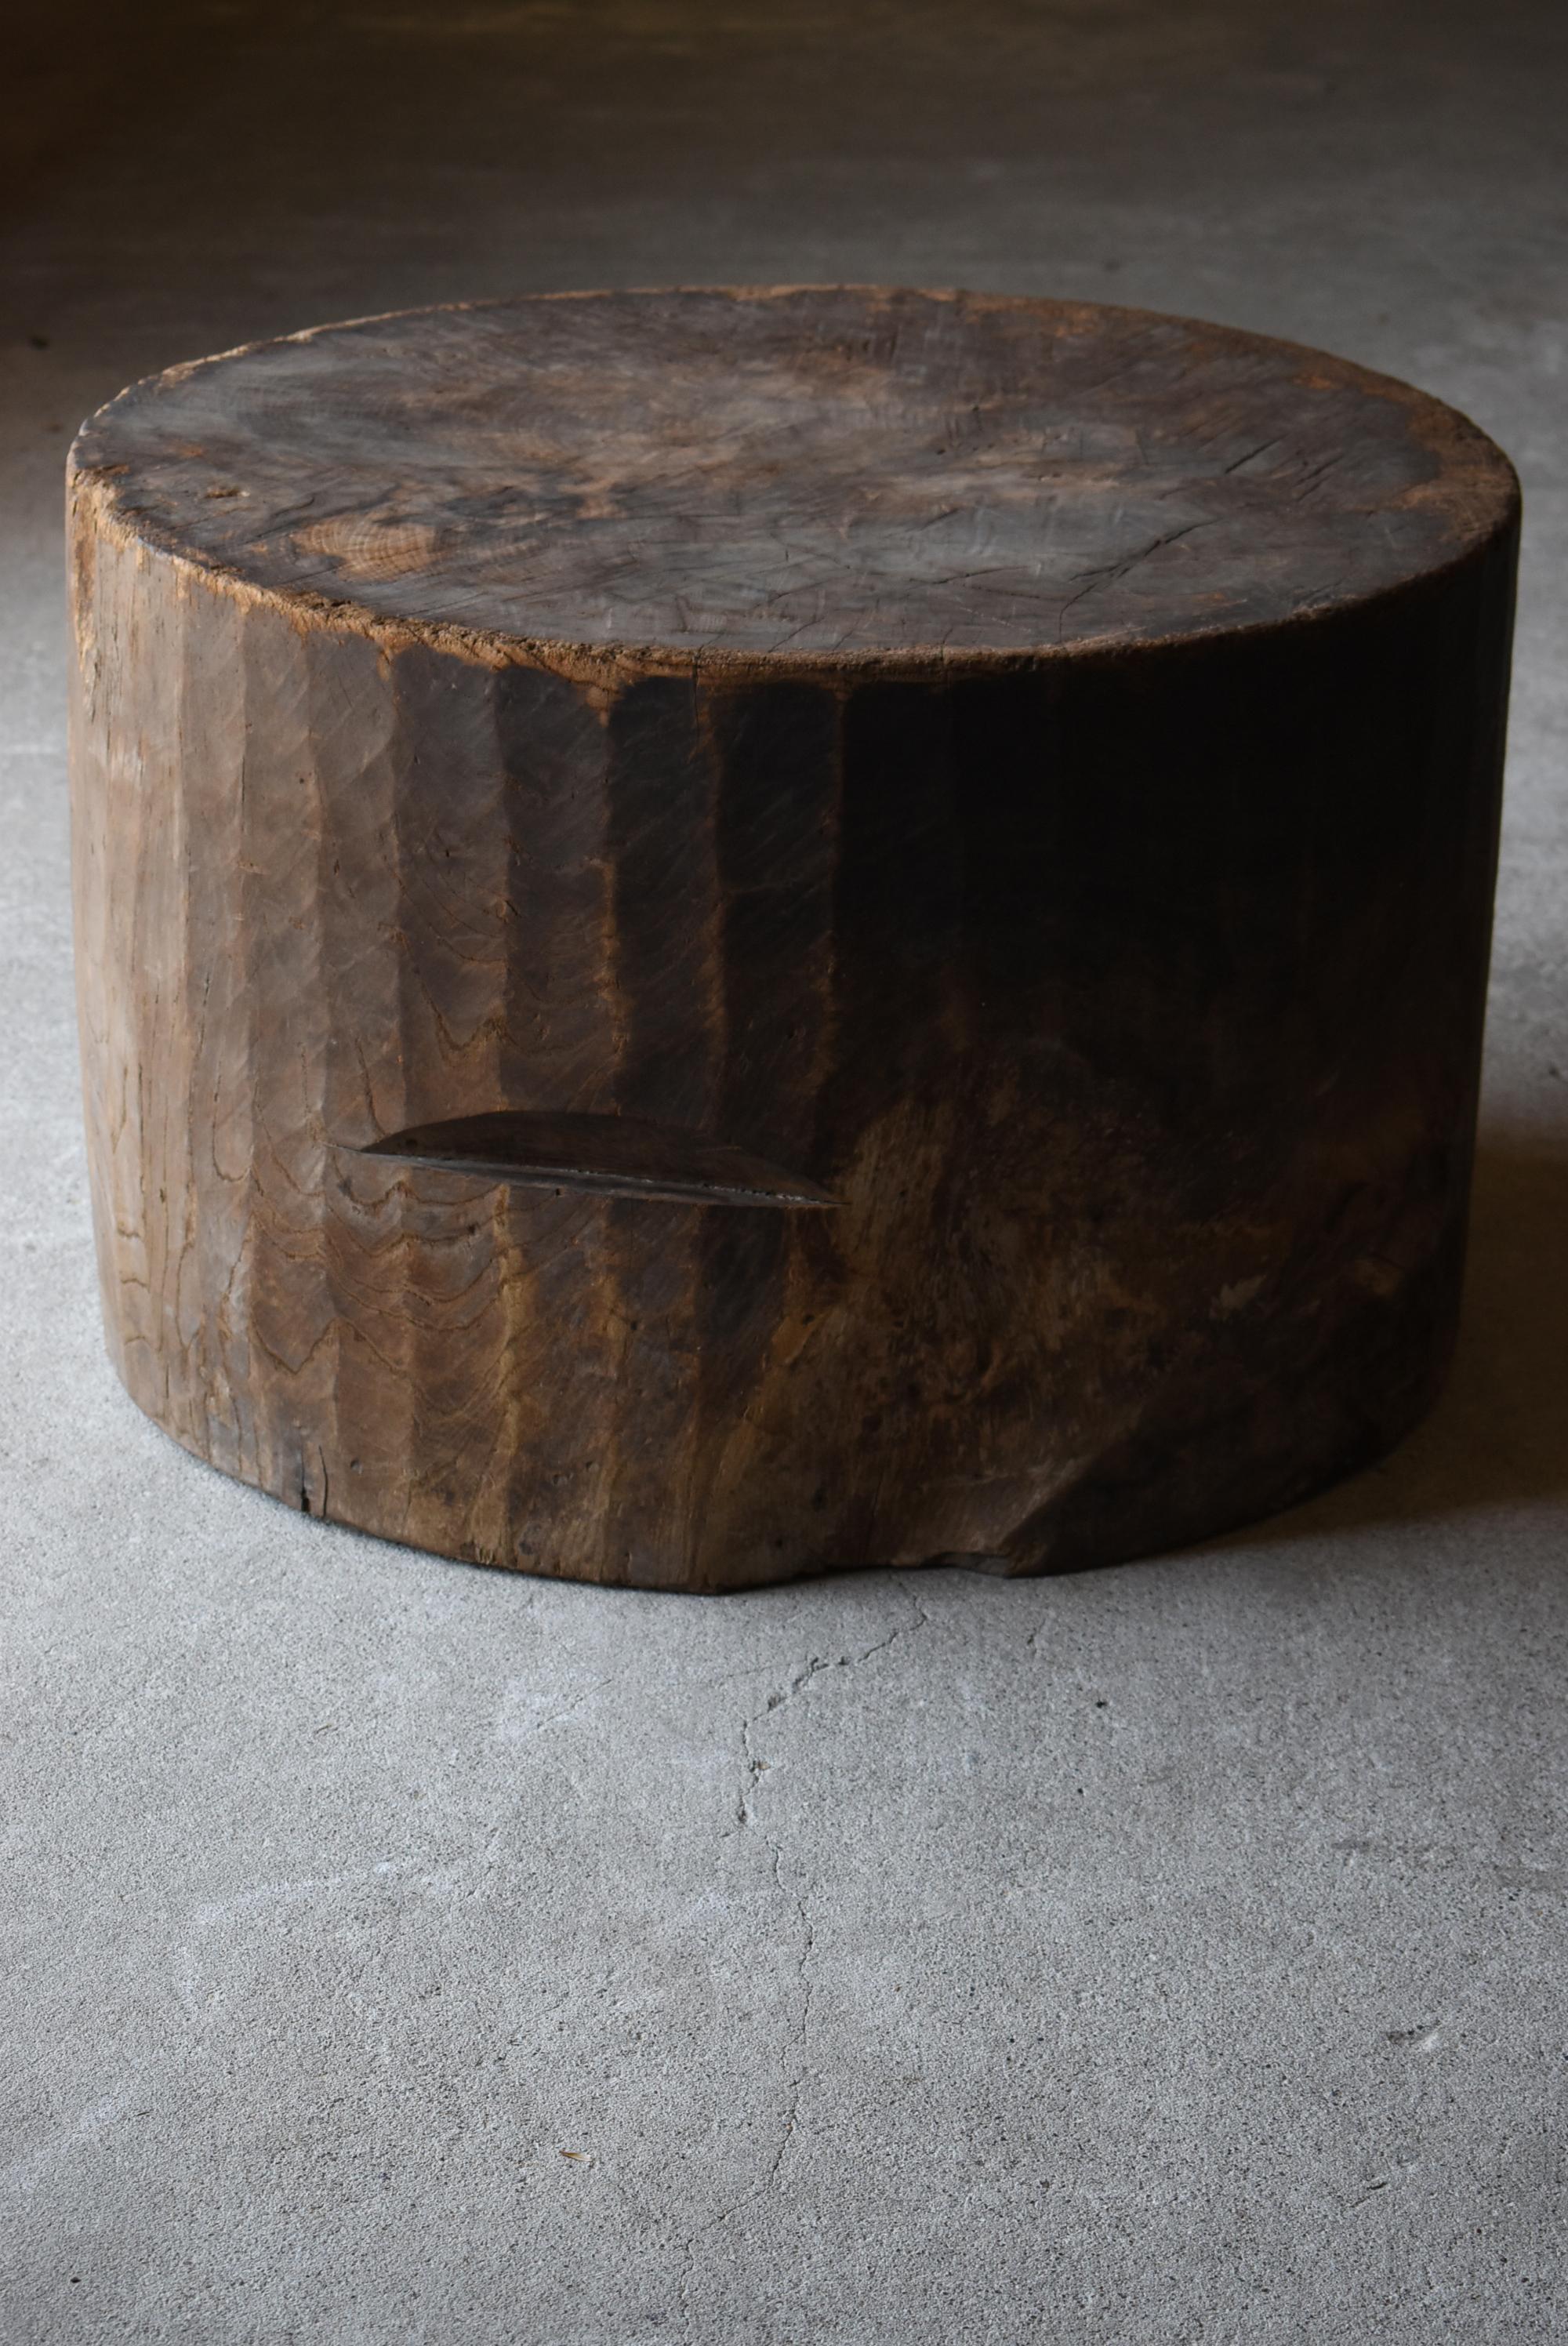 This old large coffee table is made from a huge Japanese stump.
It dates from the Meiji period (1860s-1900s).
The material is zelkova.
This size is very rare item.

It was carved from a large zelkova tree.
It is dynamic and has a unique